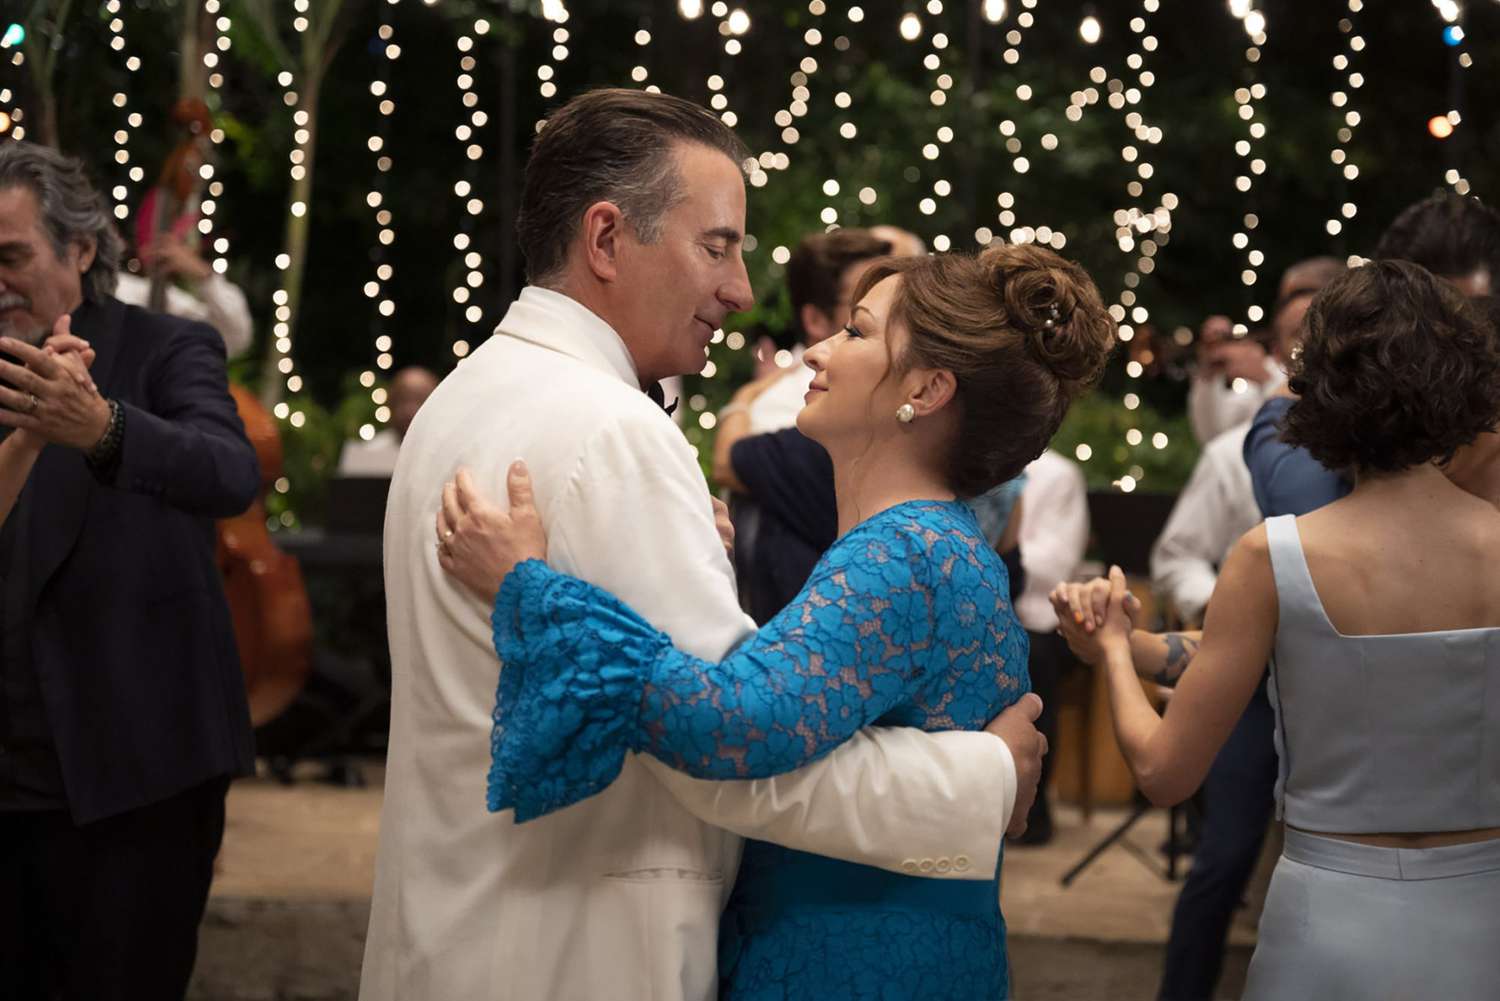 (L-R) ANDY GARCIA as Billy and GLORIA ESTEFAN as Ingrid in Warner Bros. Pictures' and HBO Max’s "FATHER OF THE BRIDE.”  Photo by Claudette Barius